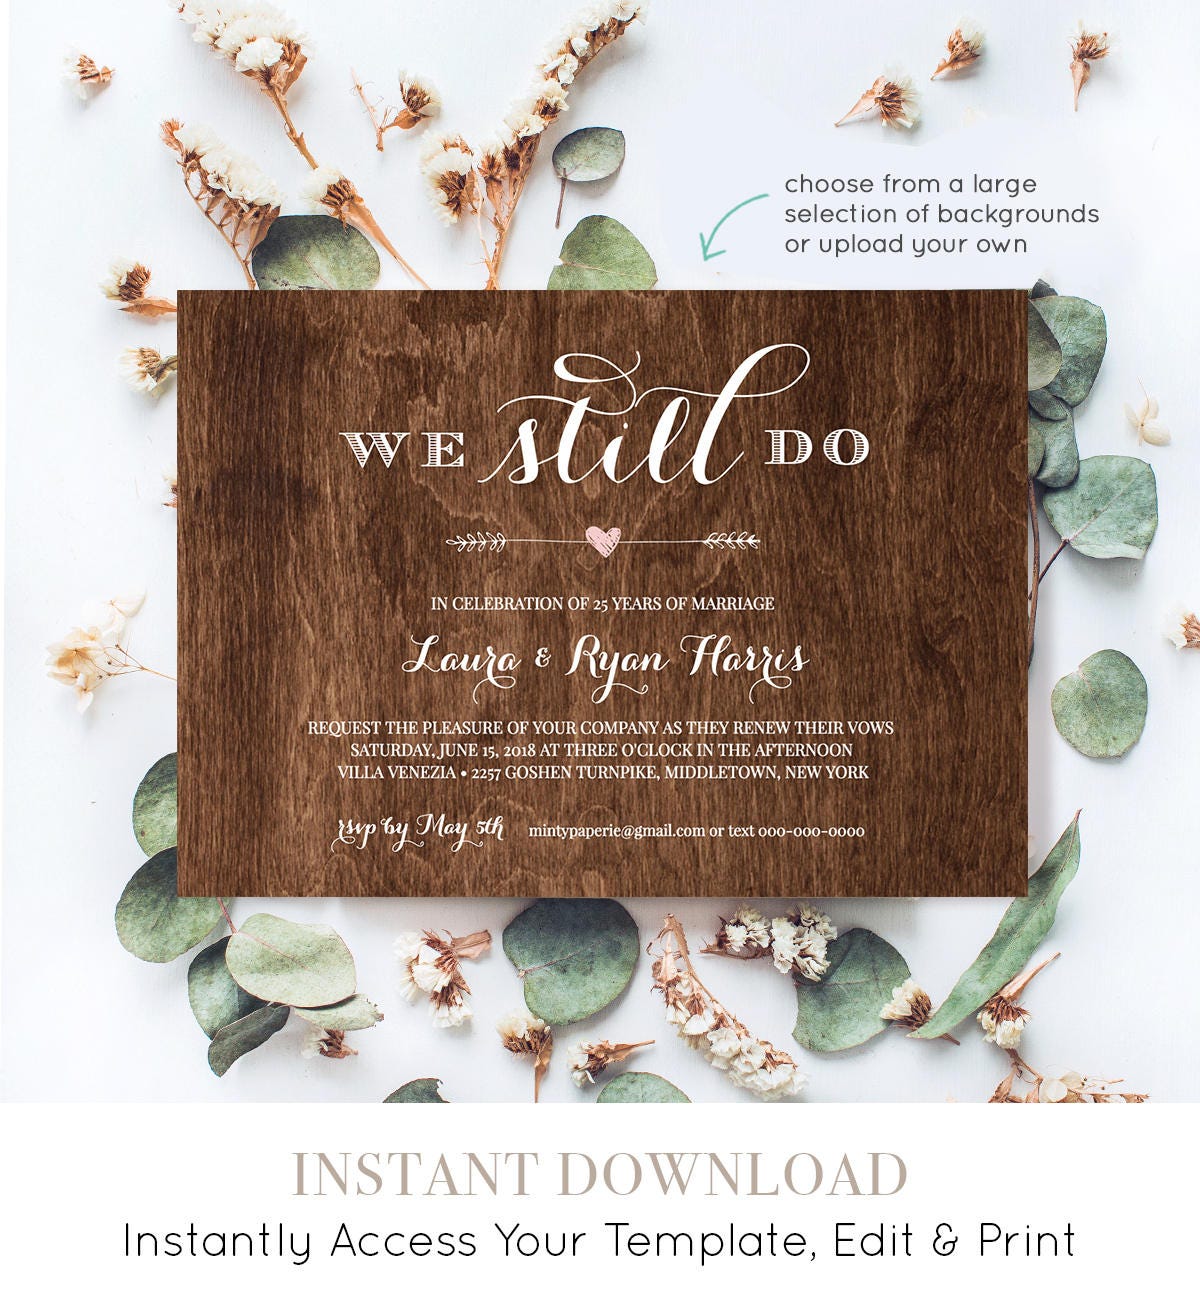 Vow Renewal Invitation Template, We Still Do, Instant Download, Wedding Anniversary, Renew Vows